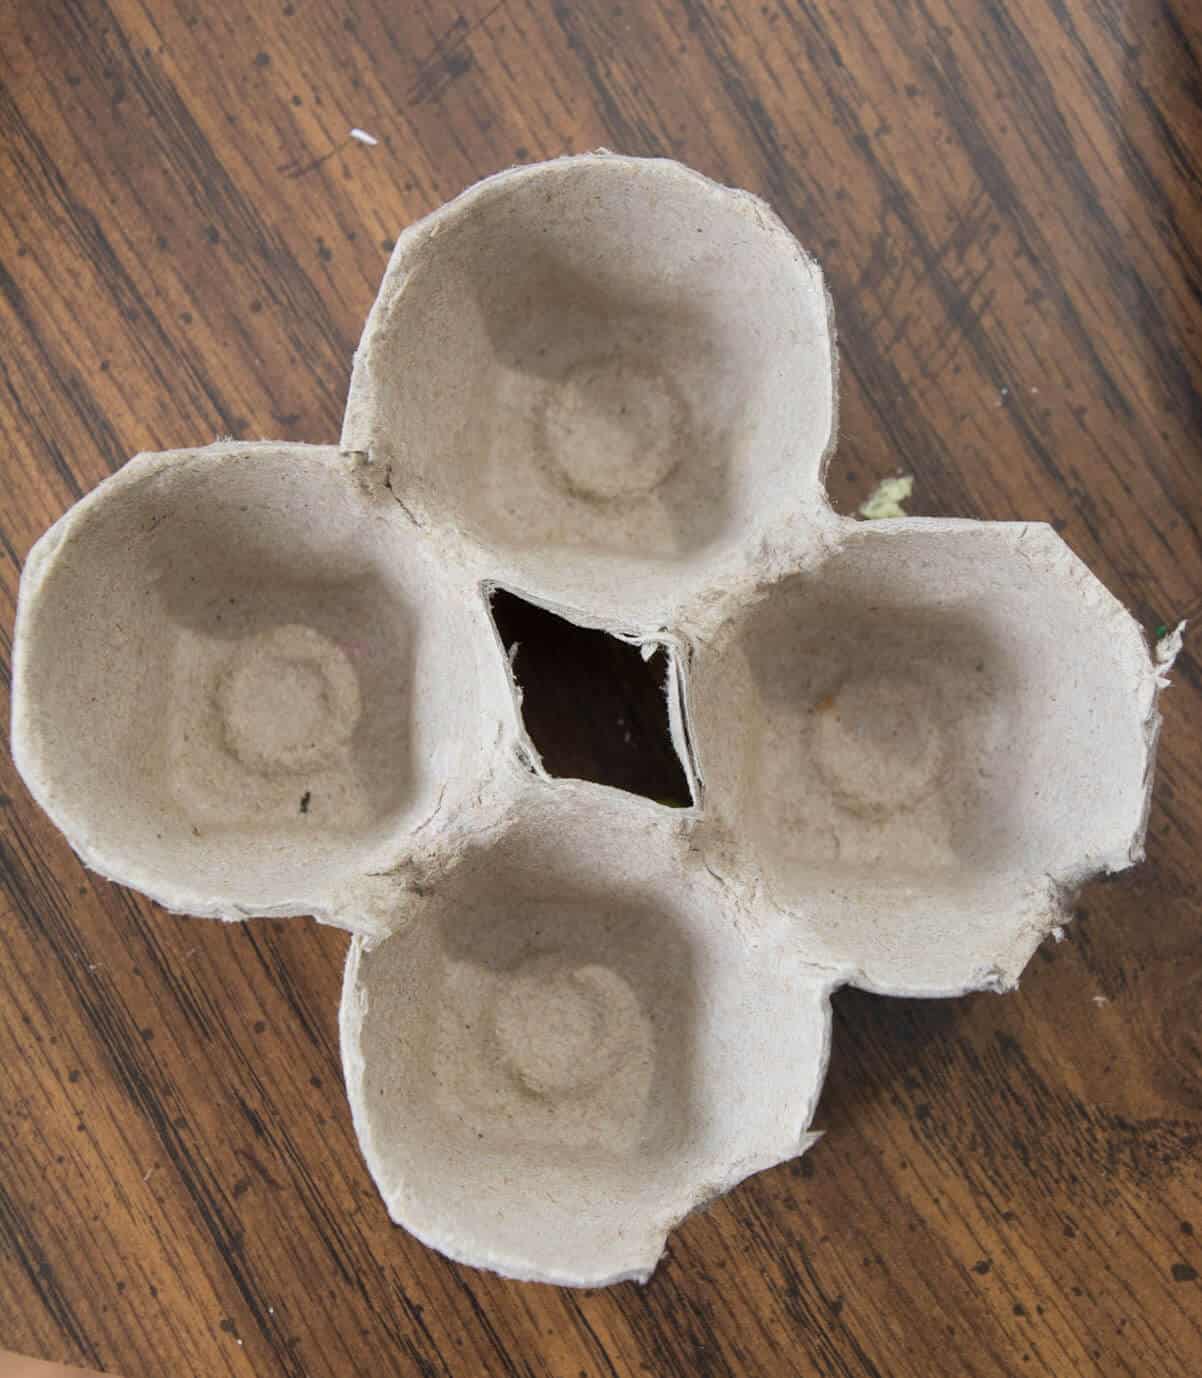 4 spots of egg carton cut on brown table.